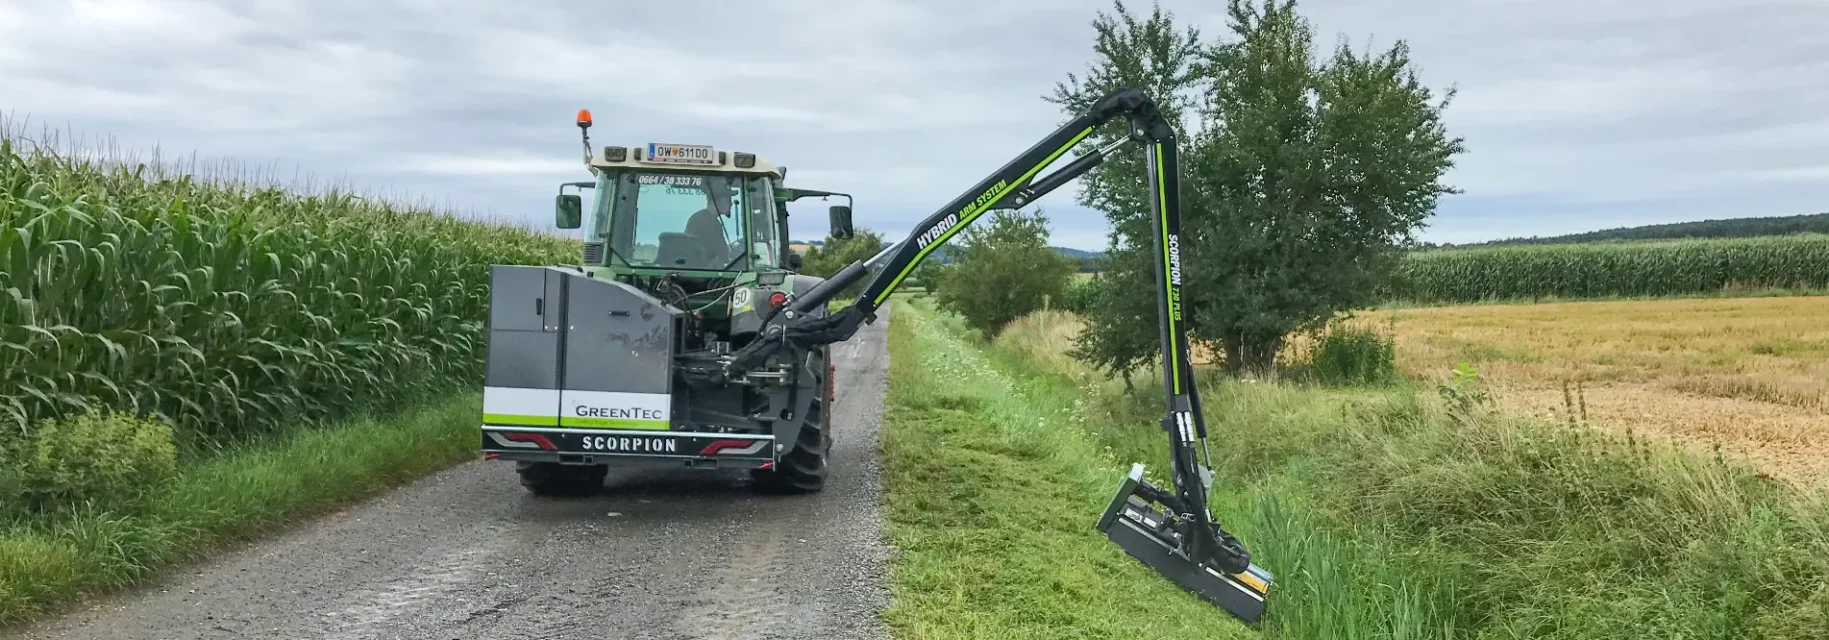 Long reach mower mounted on tractor